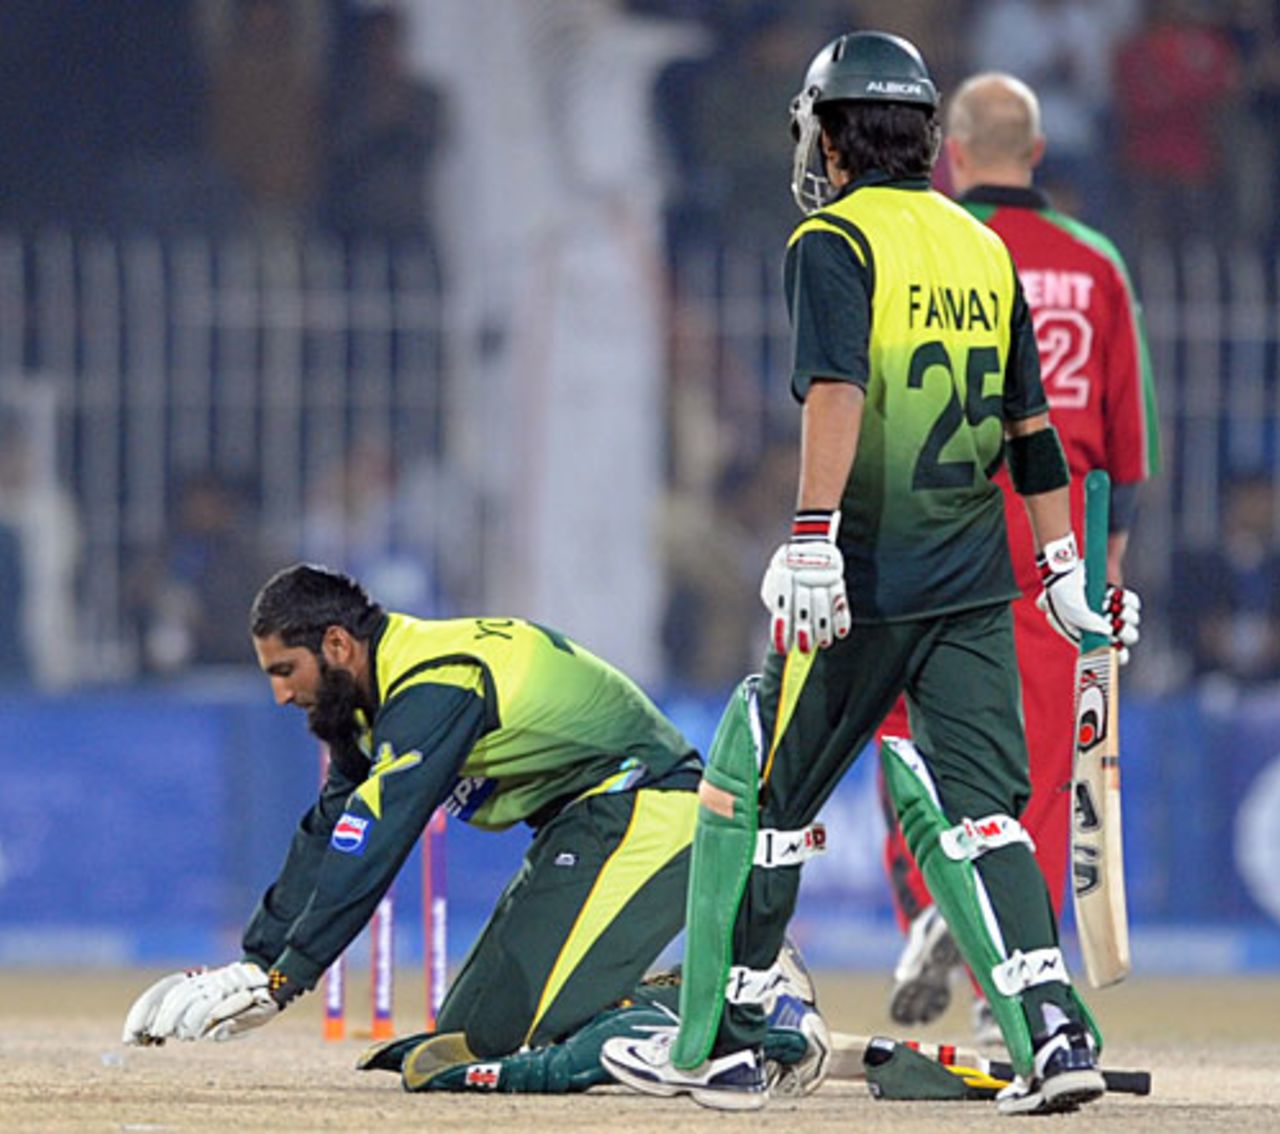 Mohammad Yousuf kneels down on the pitch after reaching his hundred, Pakistan v Zimbabwe, 4th ODI, Mobilink Cup, Faisalabad, January 30, 2008